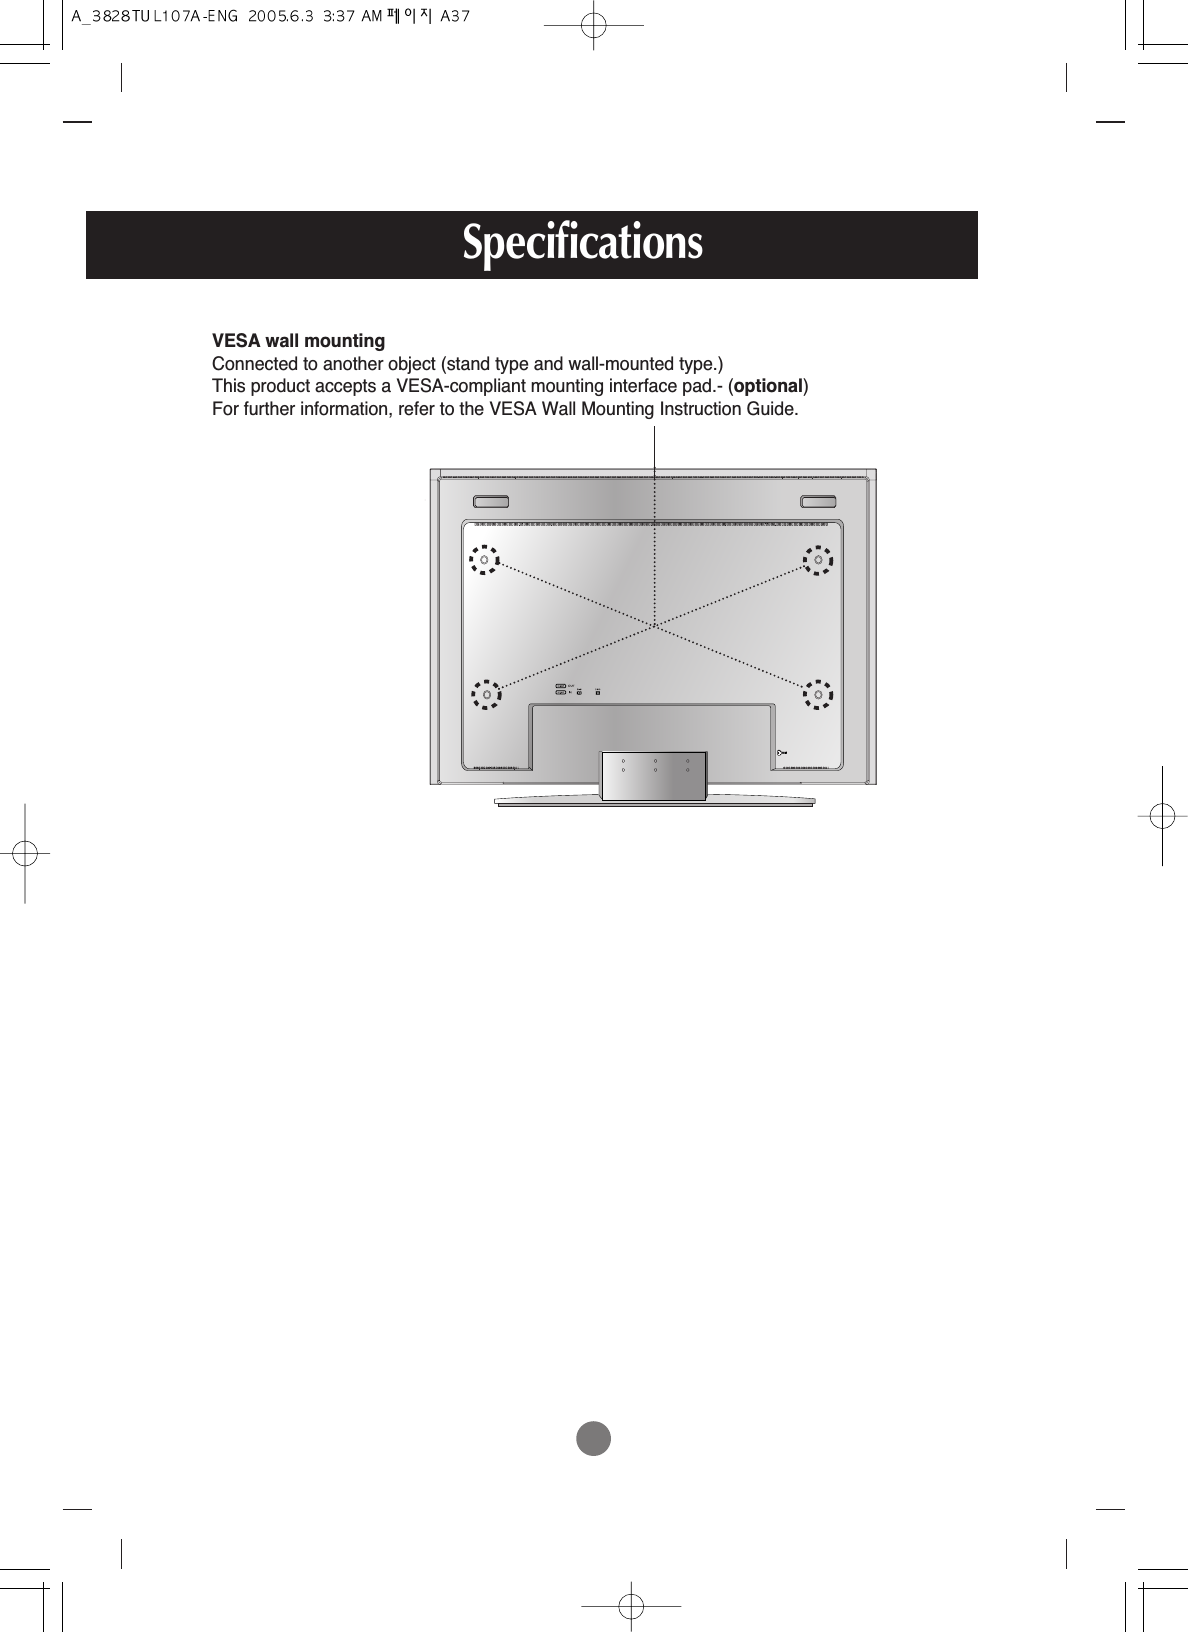 Specifications        VESA wall mountingConnected to another object (stand type and wall-mounted type.) This product accepts a VESA-compliant mounting interface pad.- (optional)For further information, refer to the VESA Wall Mounting Instruction Guide.